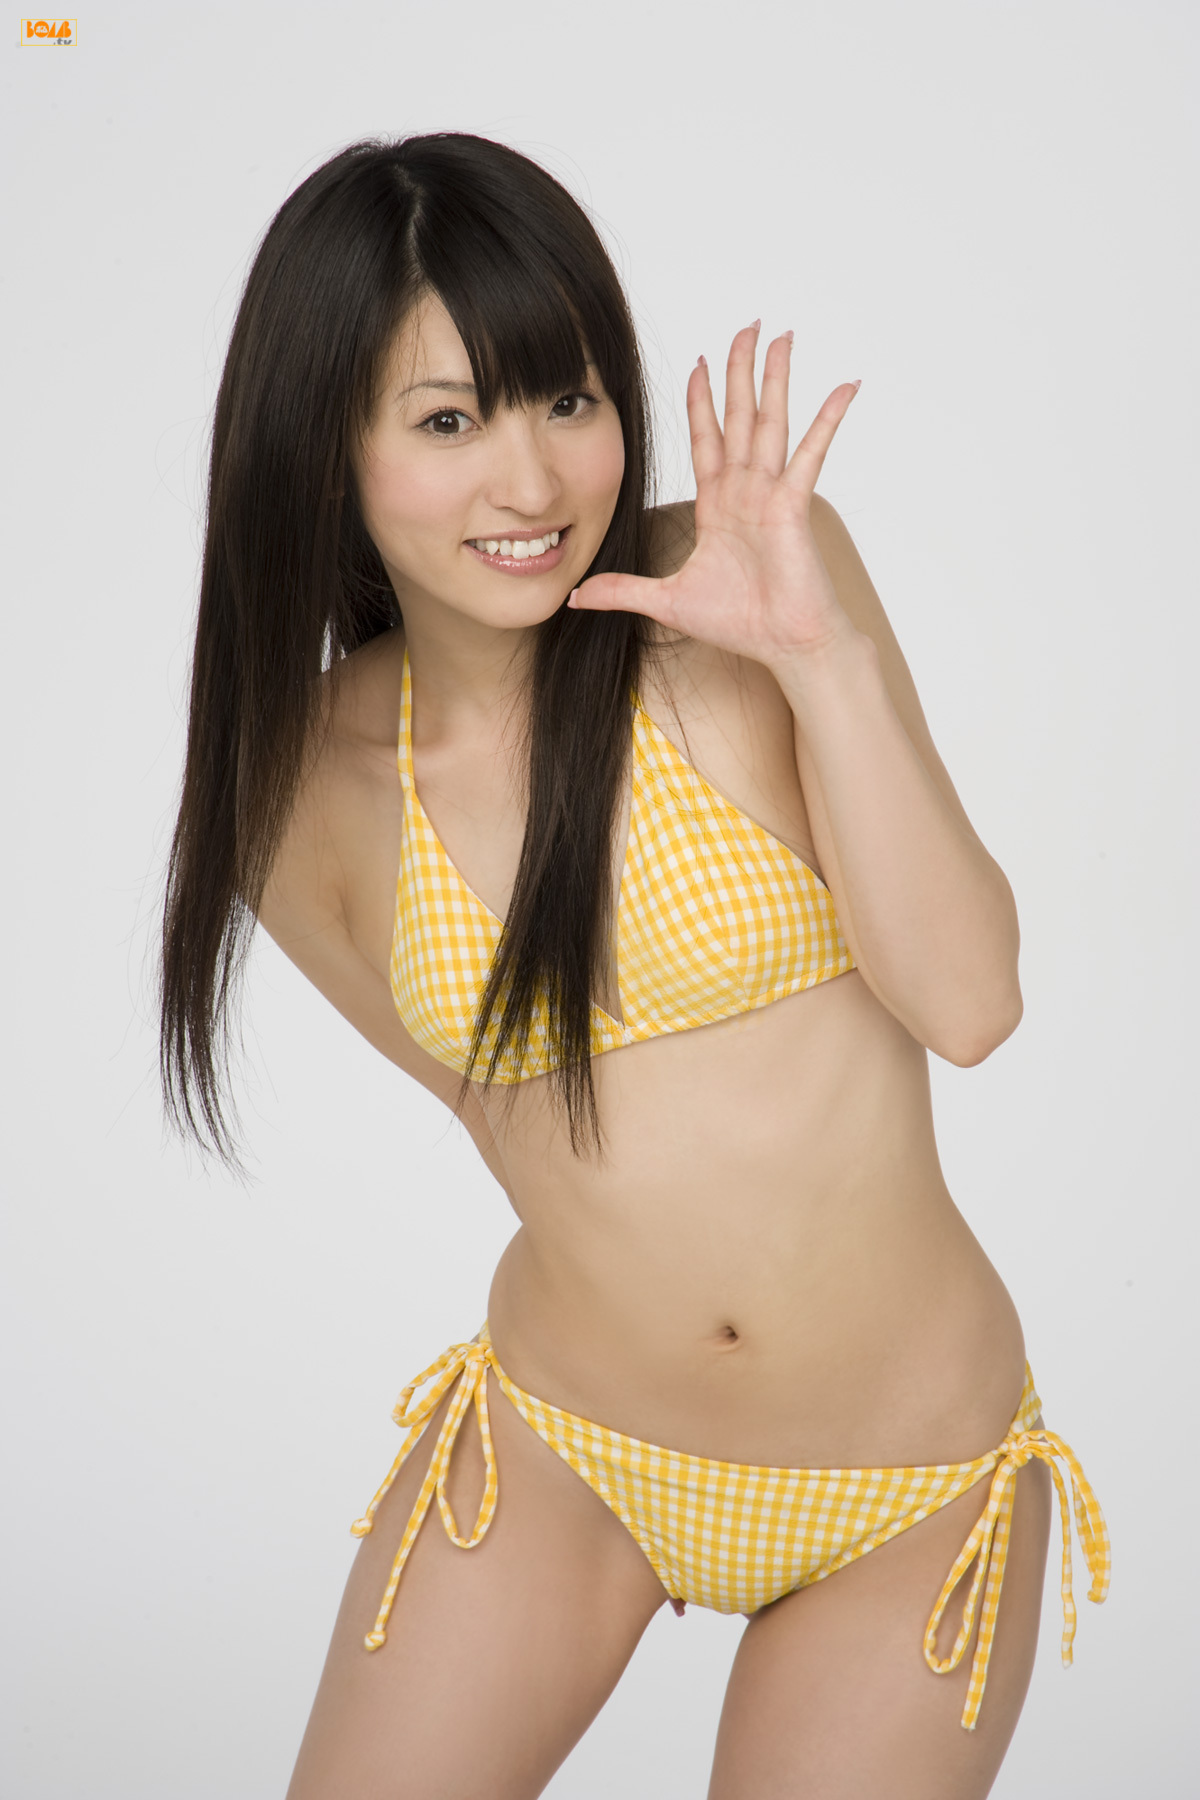 Idoling Japan beauty pictures Asia Bomb.TV  Women's idol group